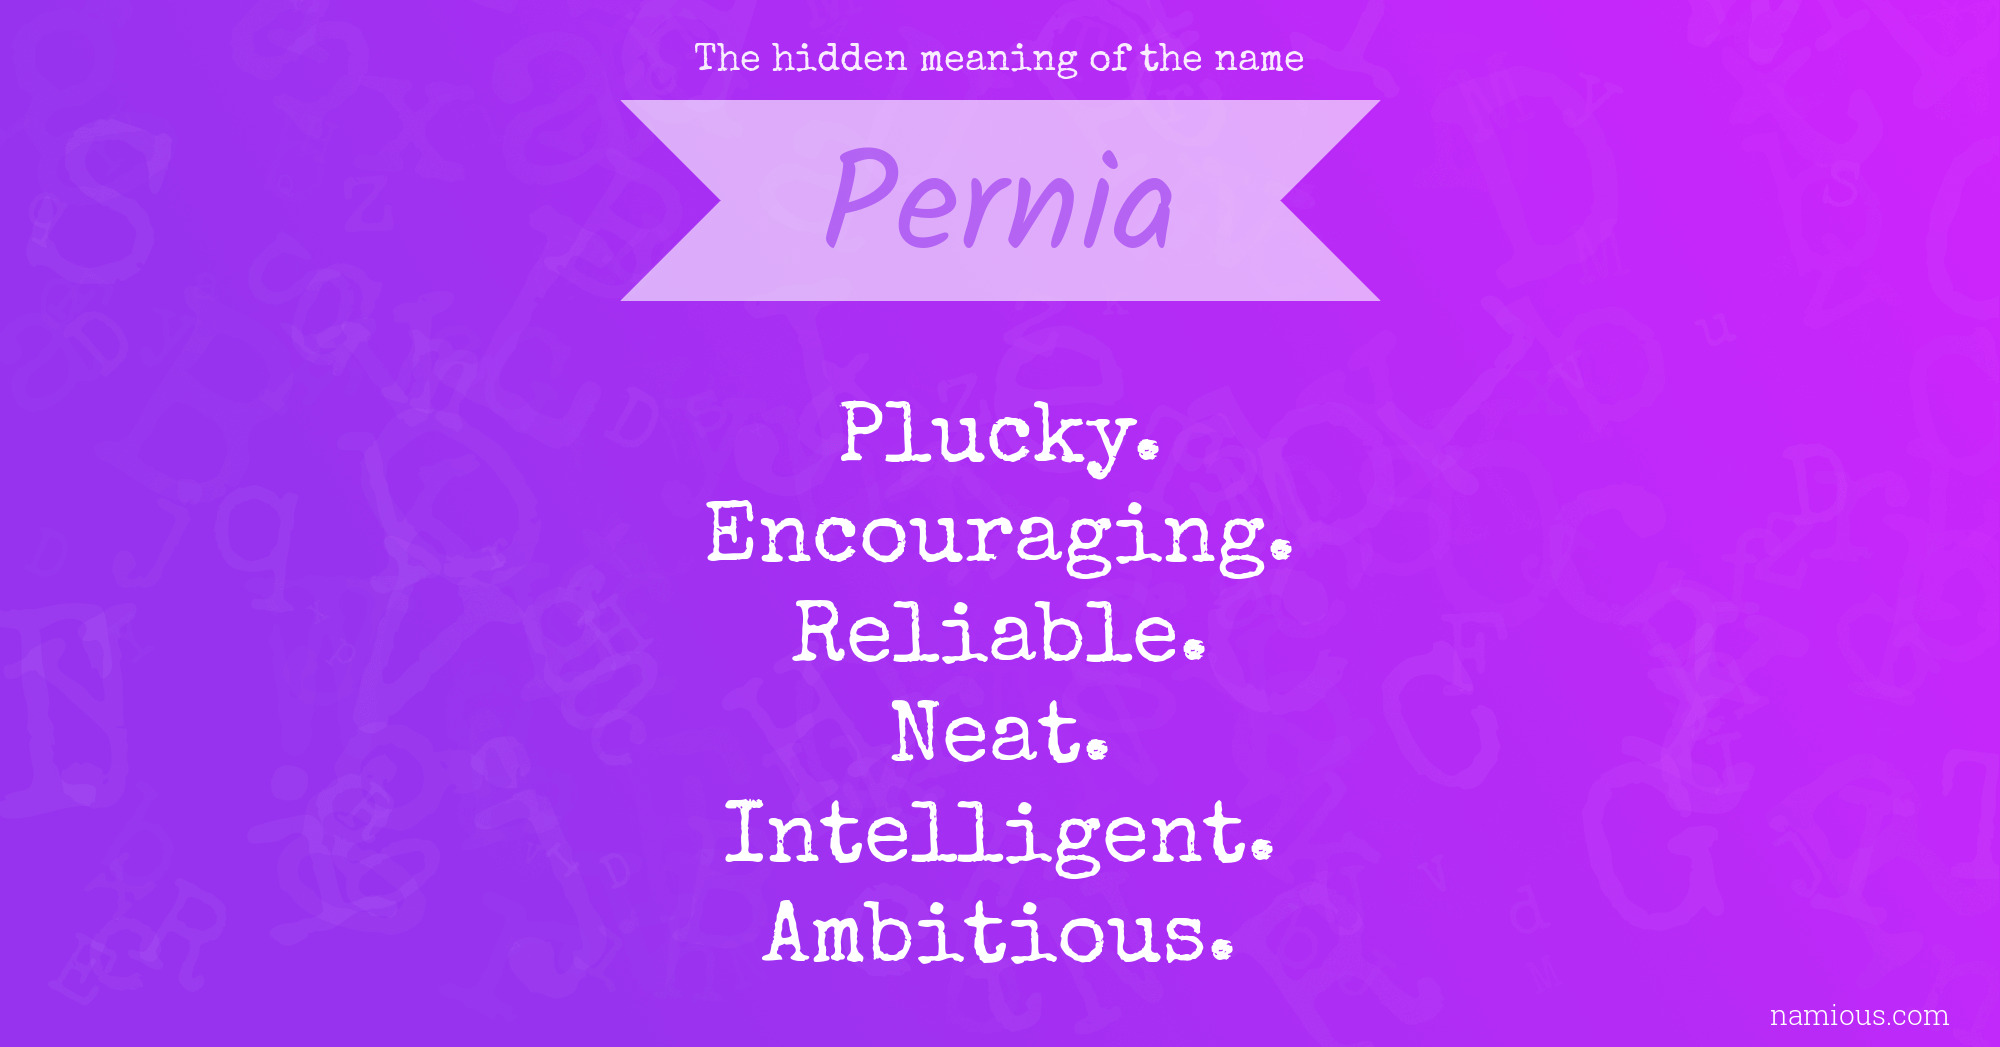 The hidden meaning of the name Pernia